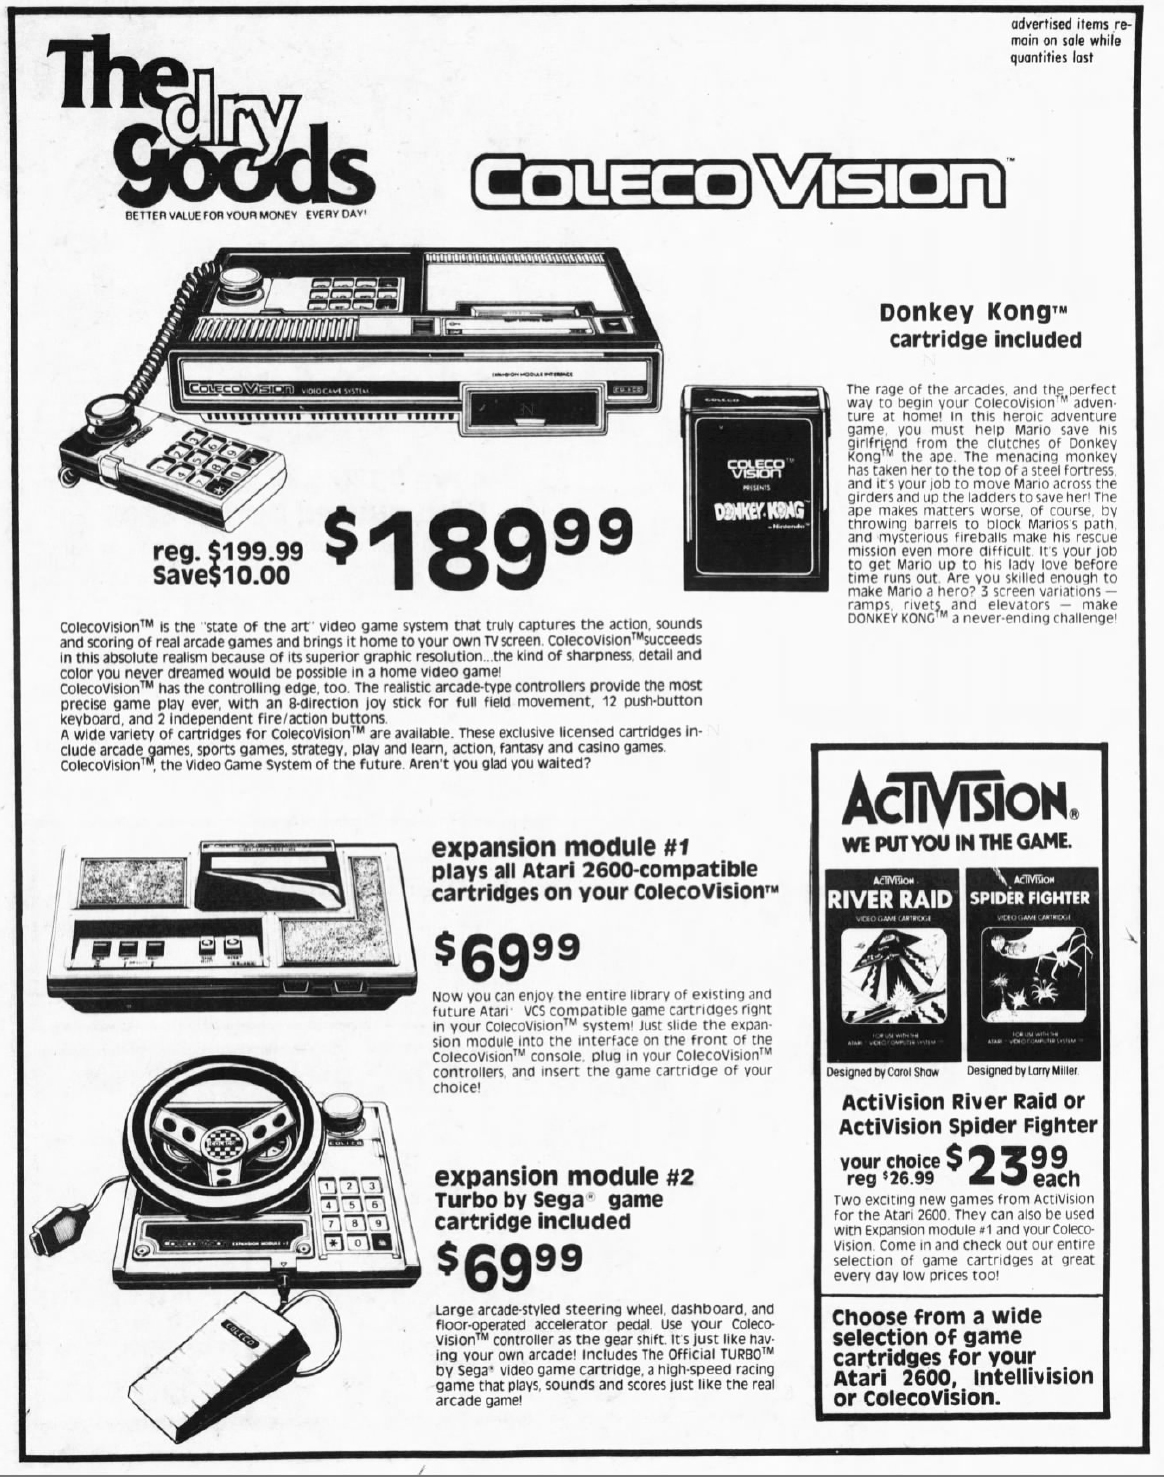 ColecoVision, a home video game system by Coleco